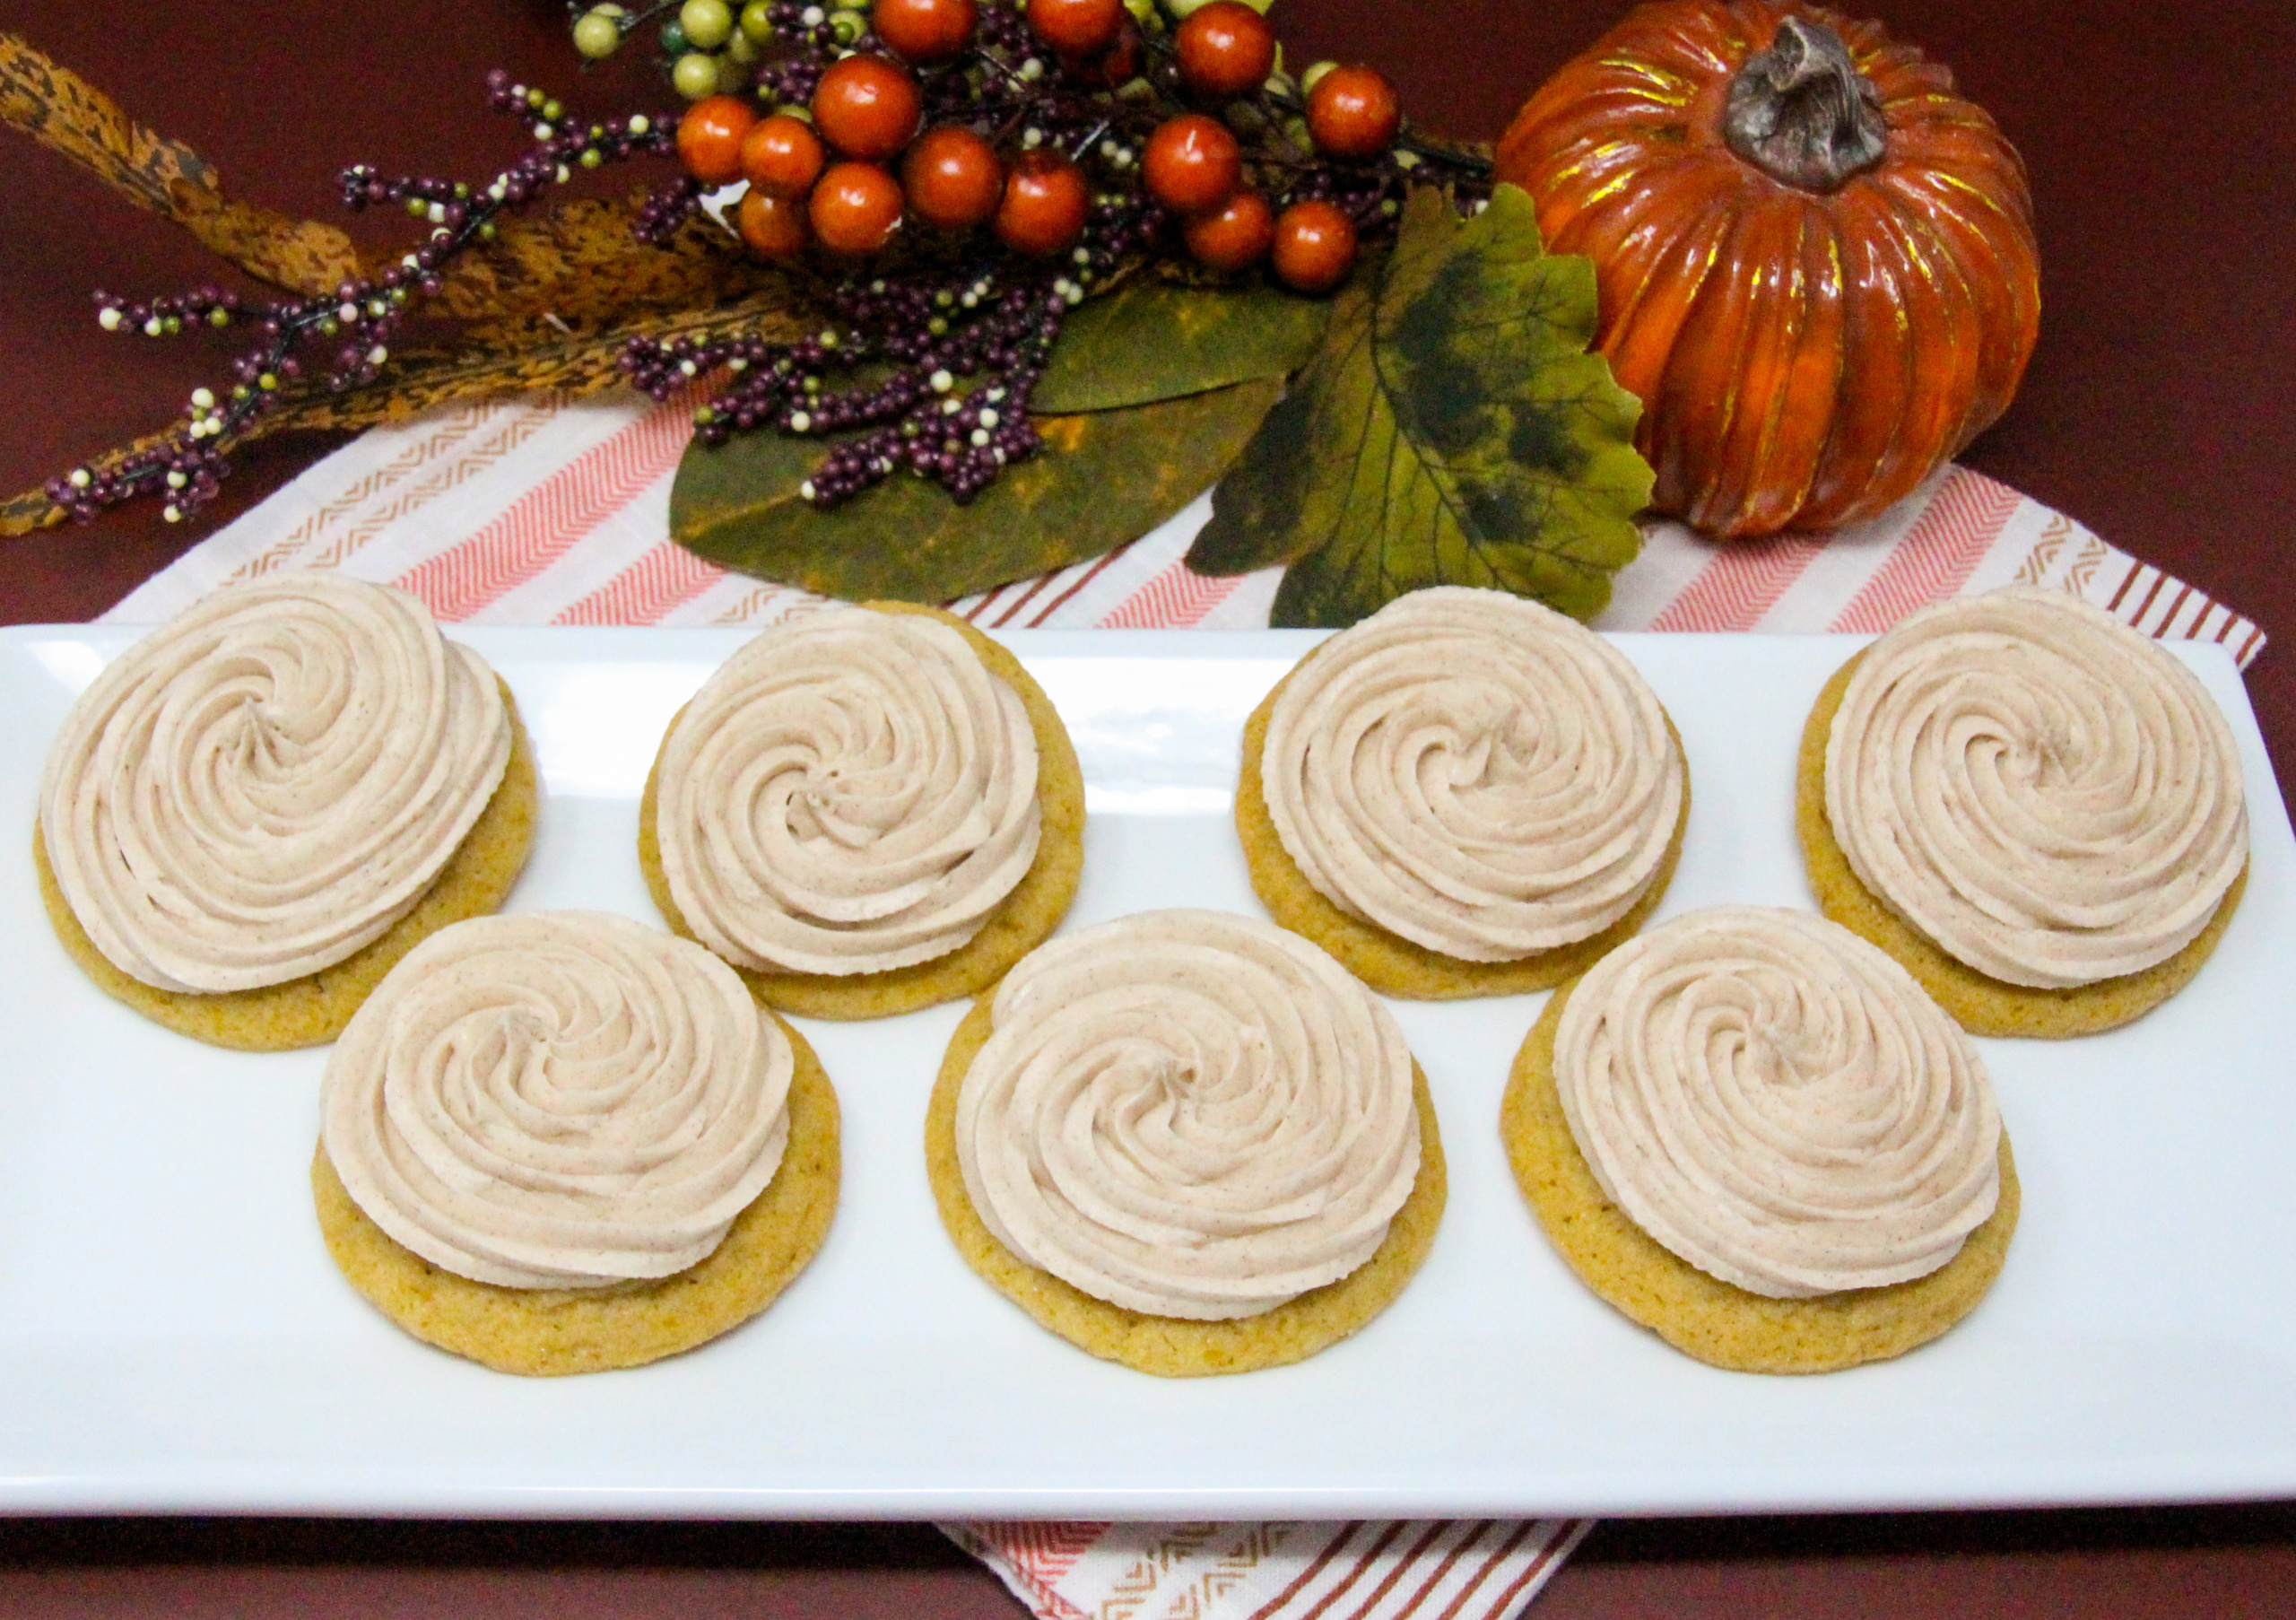 Fabulous Frosted Pumpkin Sugar Cookies are soft on the inside, a bit crunchy on the outside, and are delicious all on their own. But it’s the addition of the cinnamon-flavored frosting that makes these an extra-special treat! Recipe shared with permission granted by Darci Hannah, author of MURDER AT THE PUMPKIN PAGEANT. 